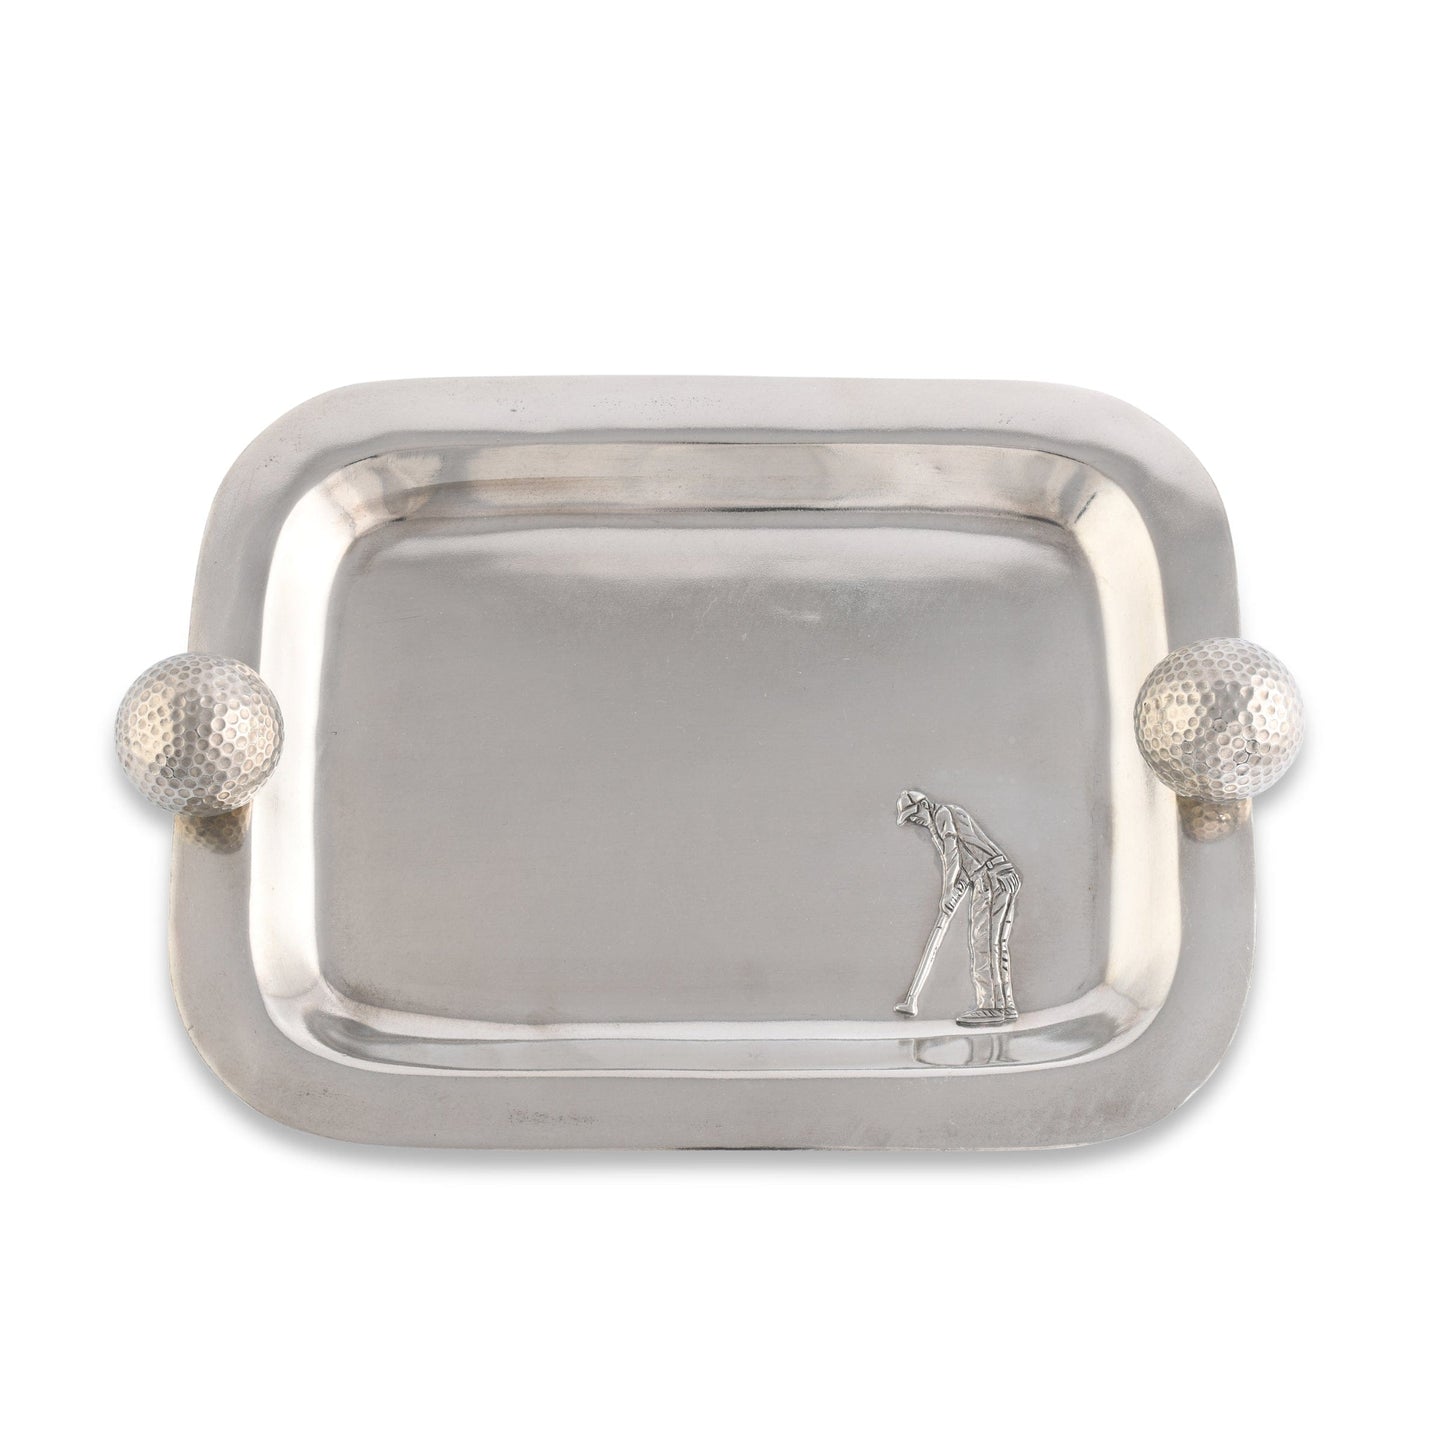 Pewter Catchall Tray with Golf Ball Handles